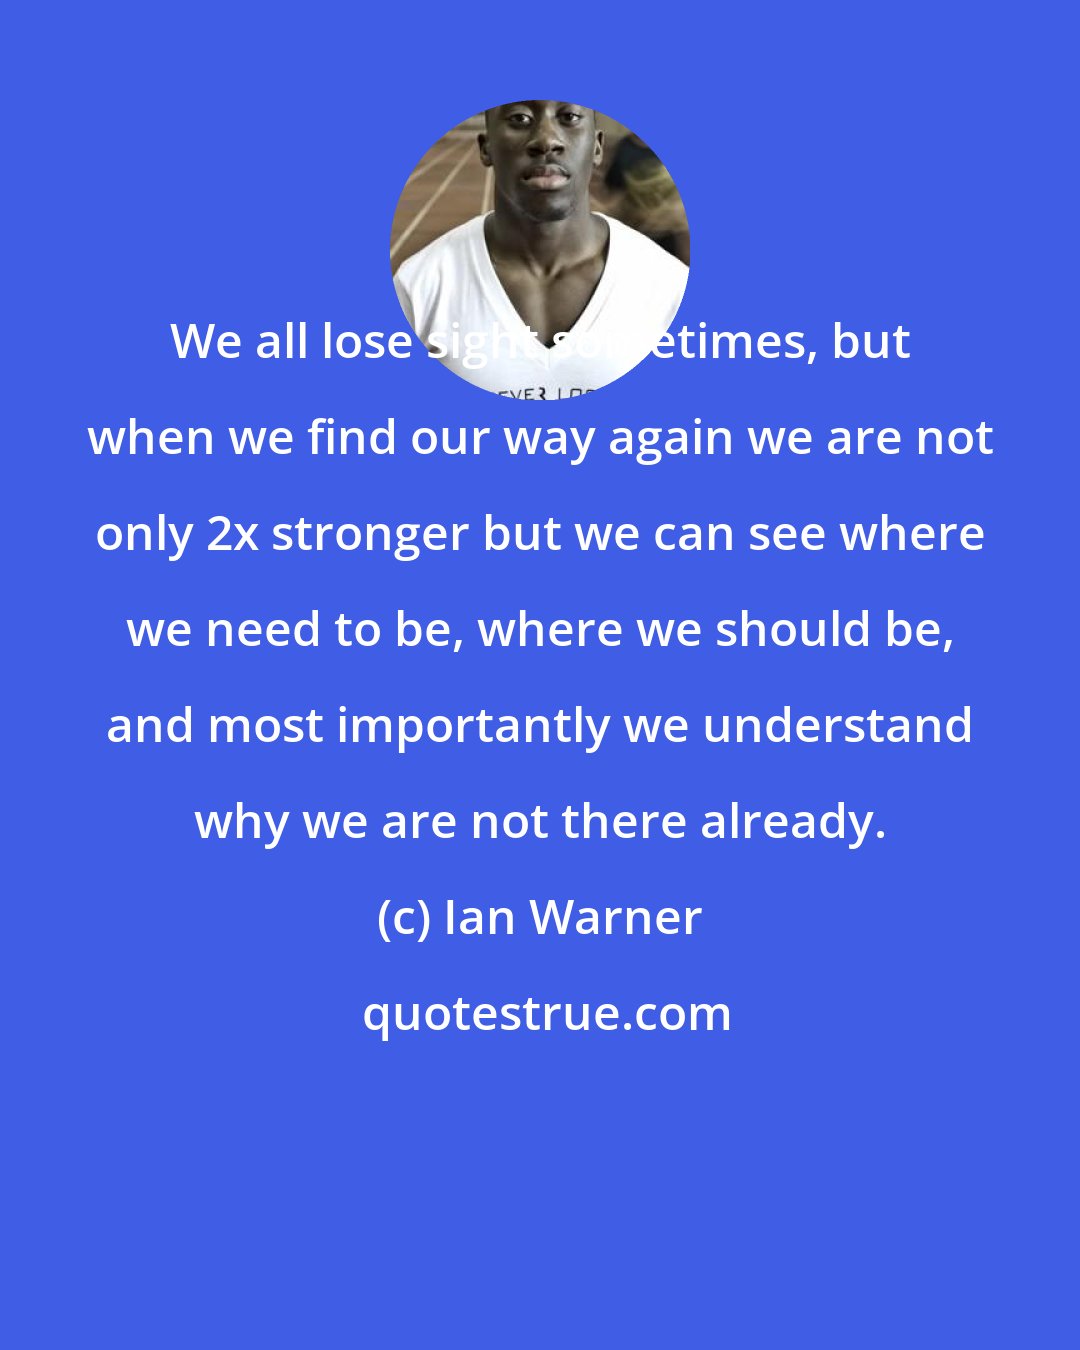 Ian Warner: We all lose sight sometimes, but when we find our way again we are not only 2x stronger but we can see where we need to be, where we should be, and most importantly we understand why we are not there already.